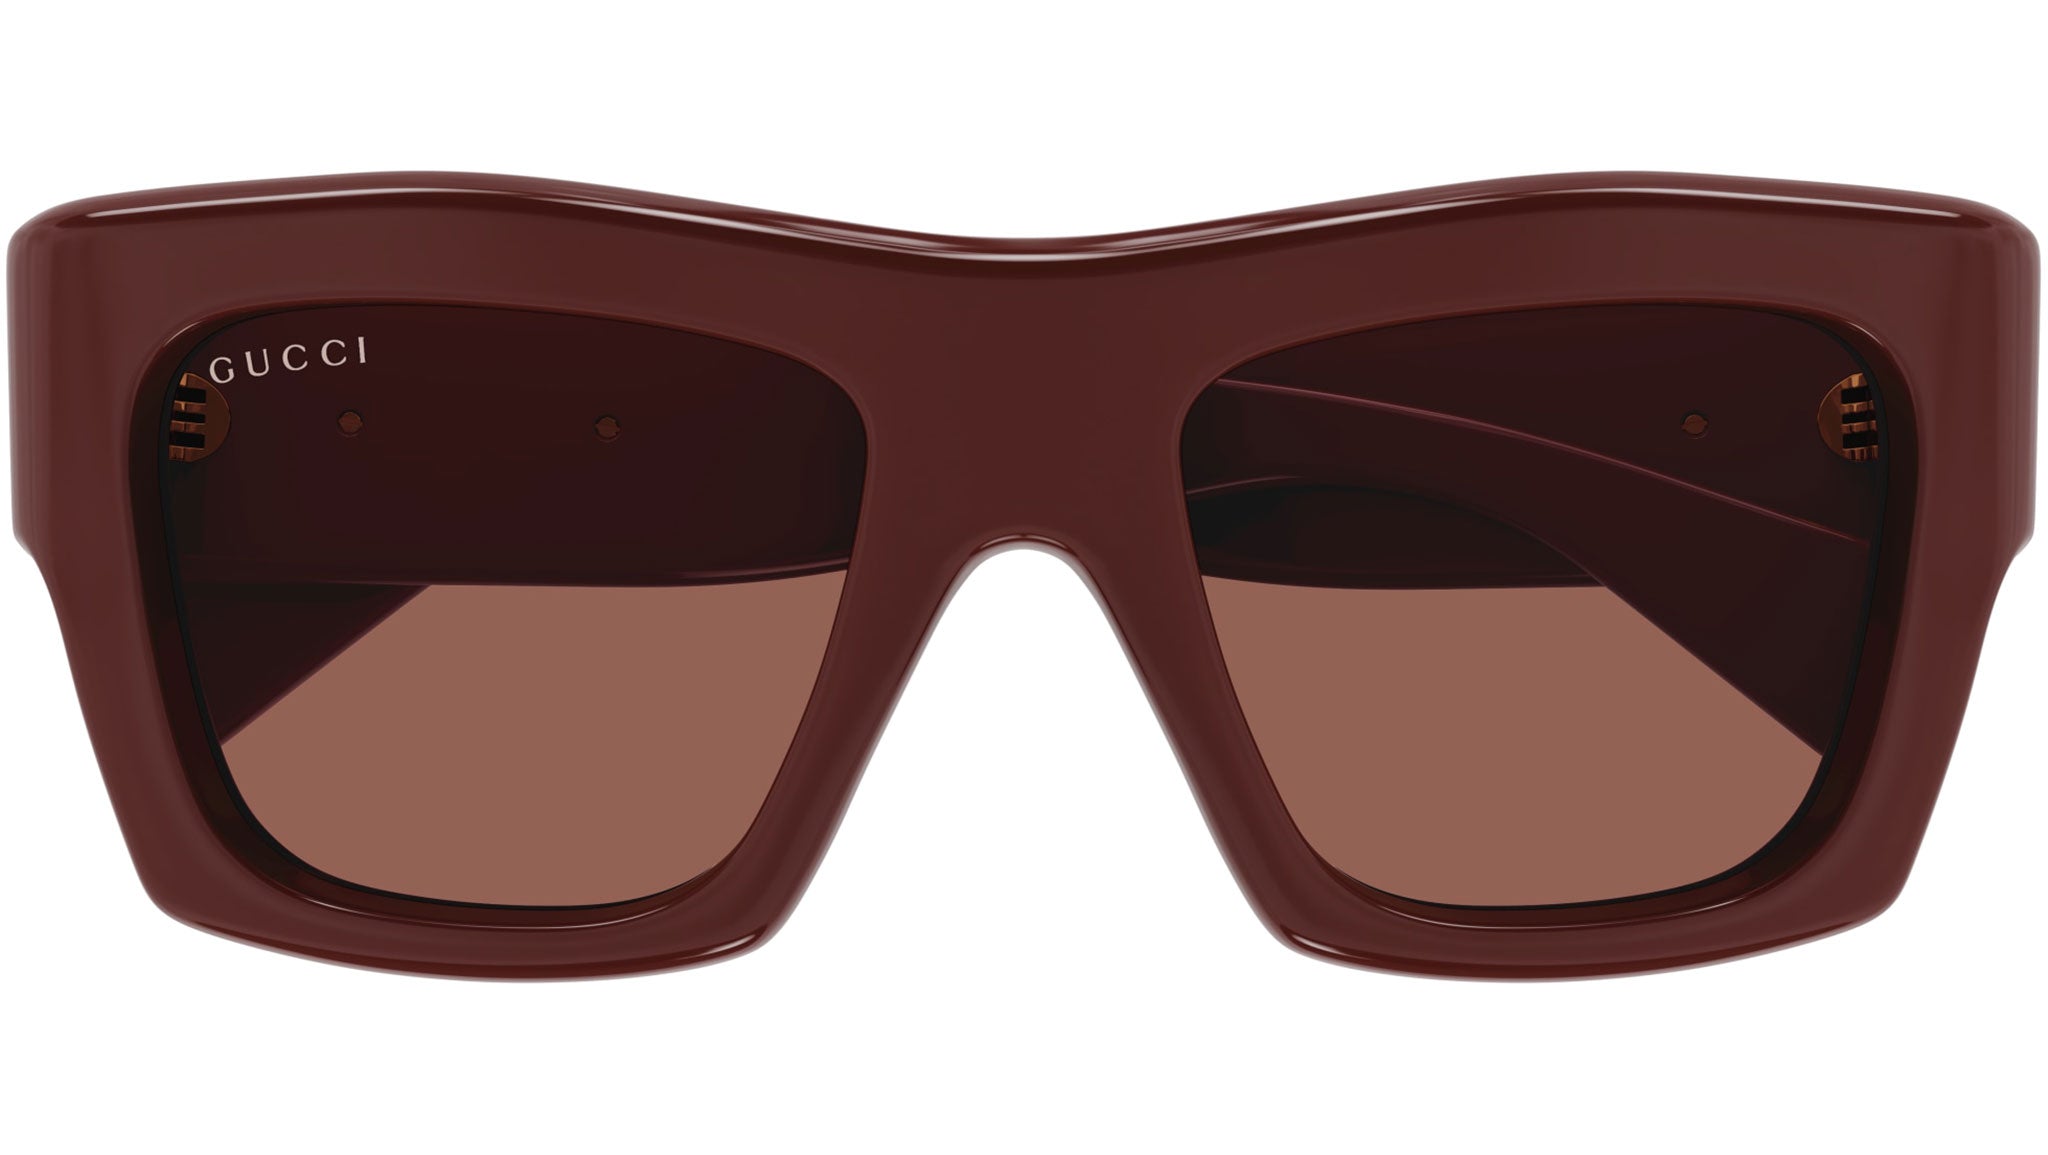 GG1772S 003 Red Brown